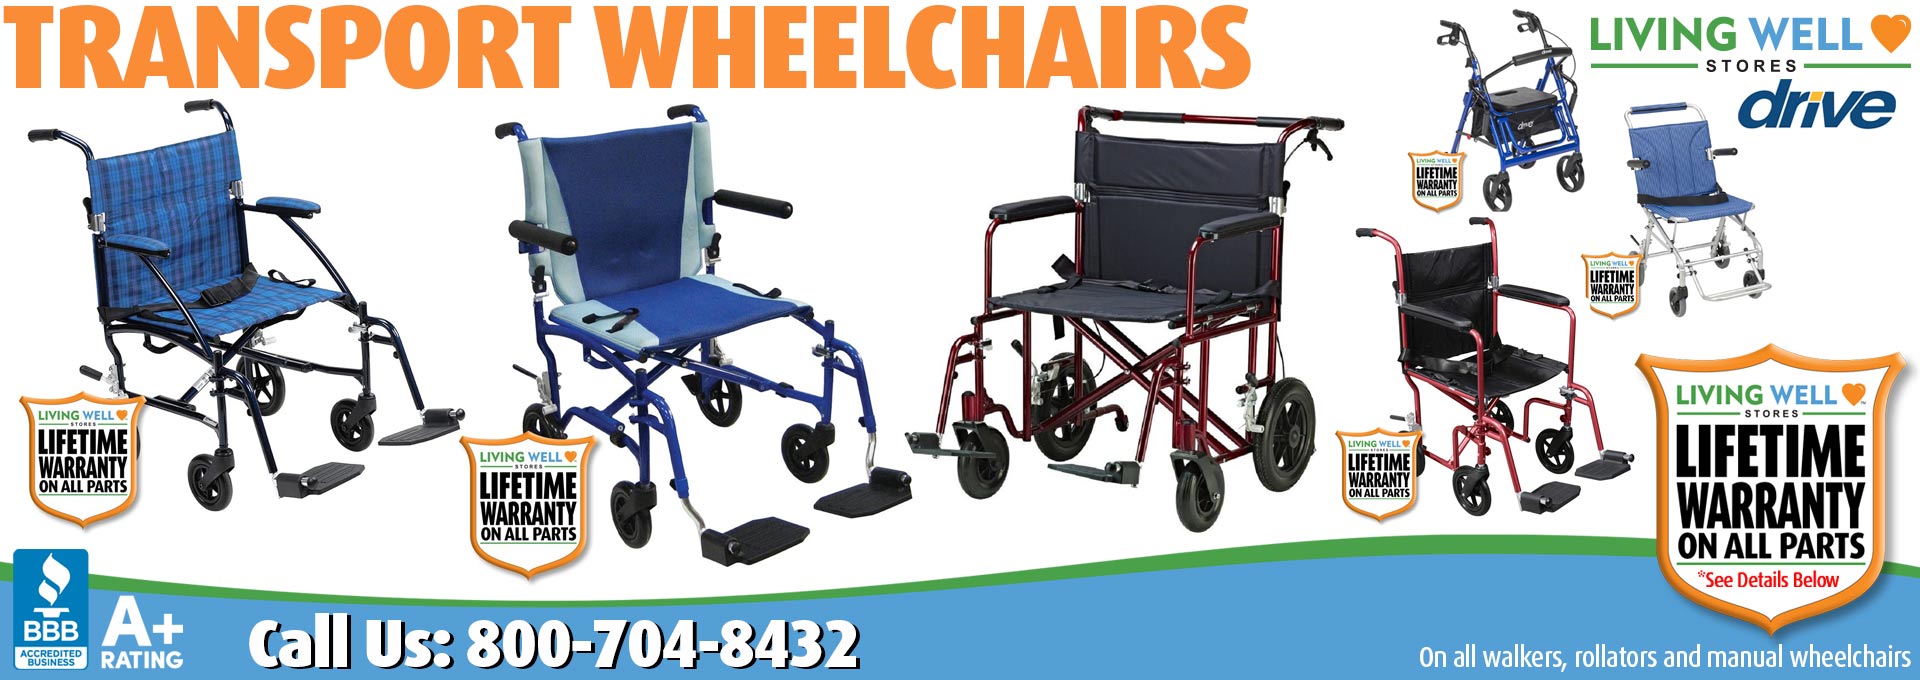 Living Well Stores: Featuring the very best selection of Walking Assist Transport Wheelchair Products for Sale